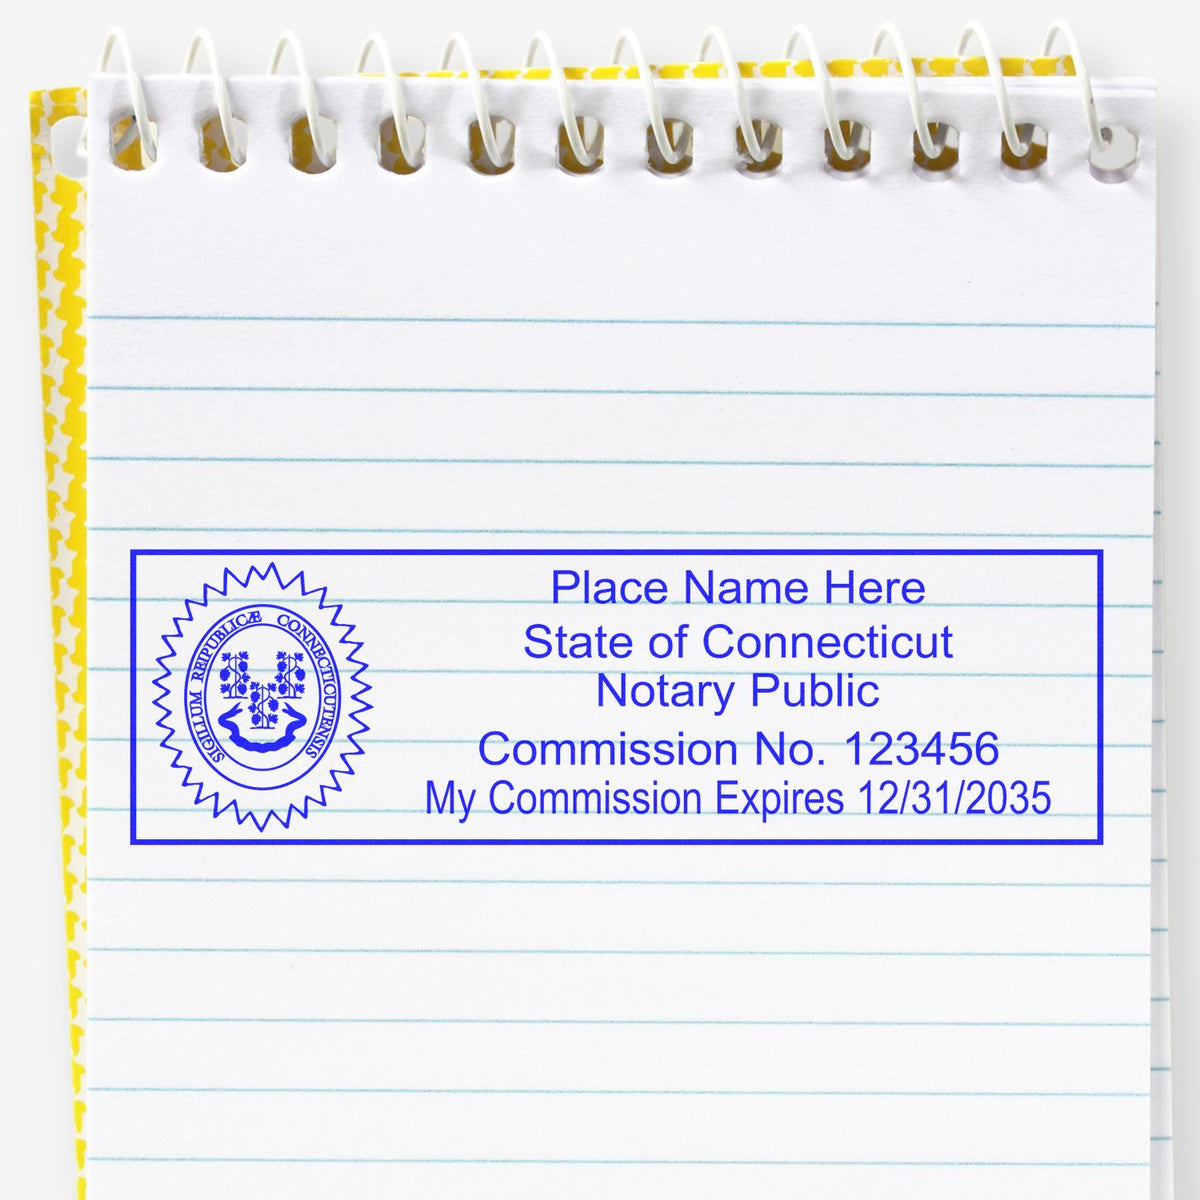 An alternative view of the PSI Connecticut Notary Stamp stamped on a sheet of paper showing the image in use